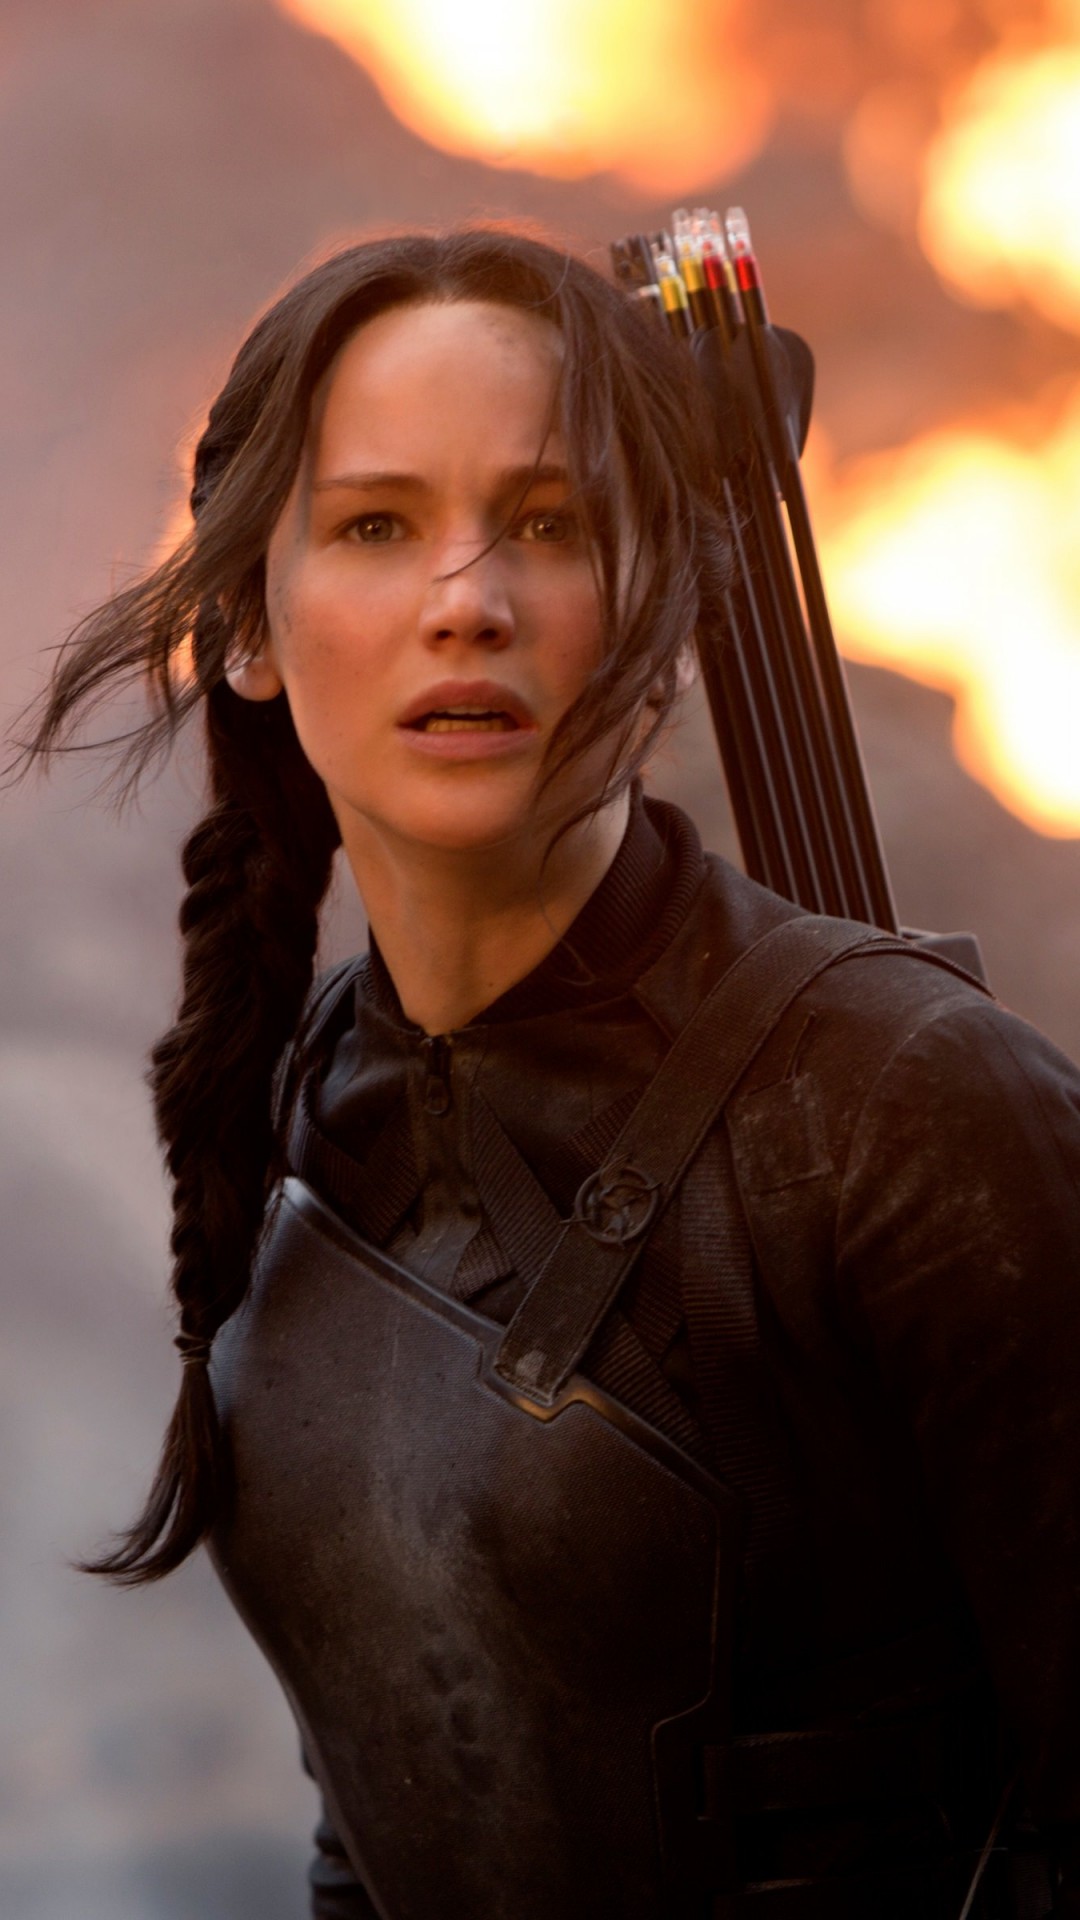 Jennifer Lawrence in The Hunger Games Wallpaper for SONY Xperia Z2